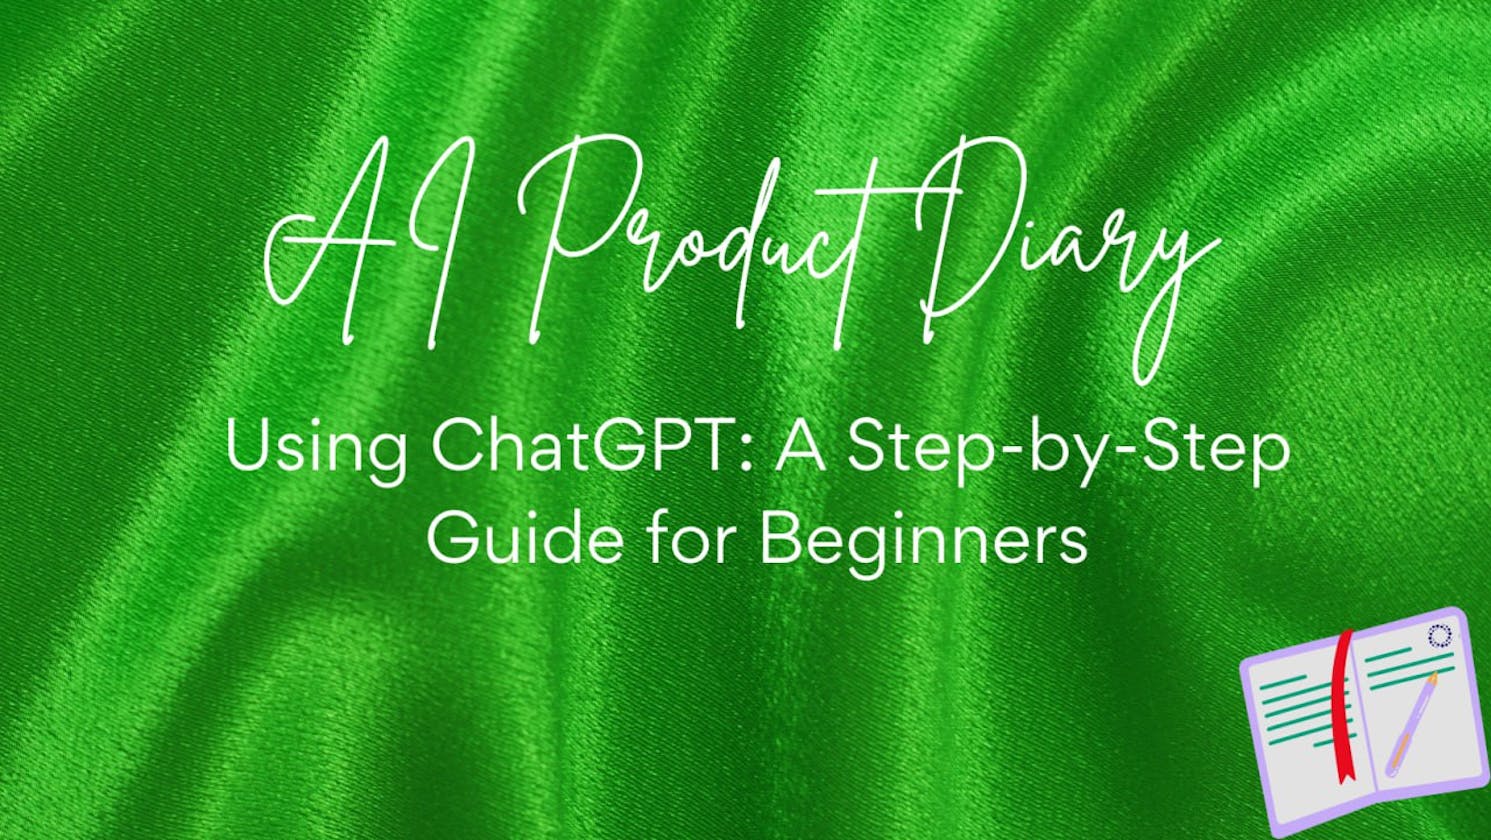 Using ChatGPT: A Step-by-Step Guide for Beginners